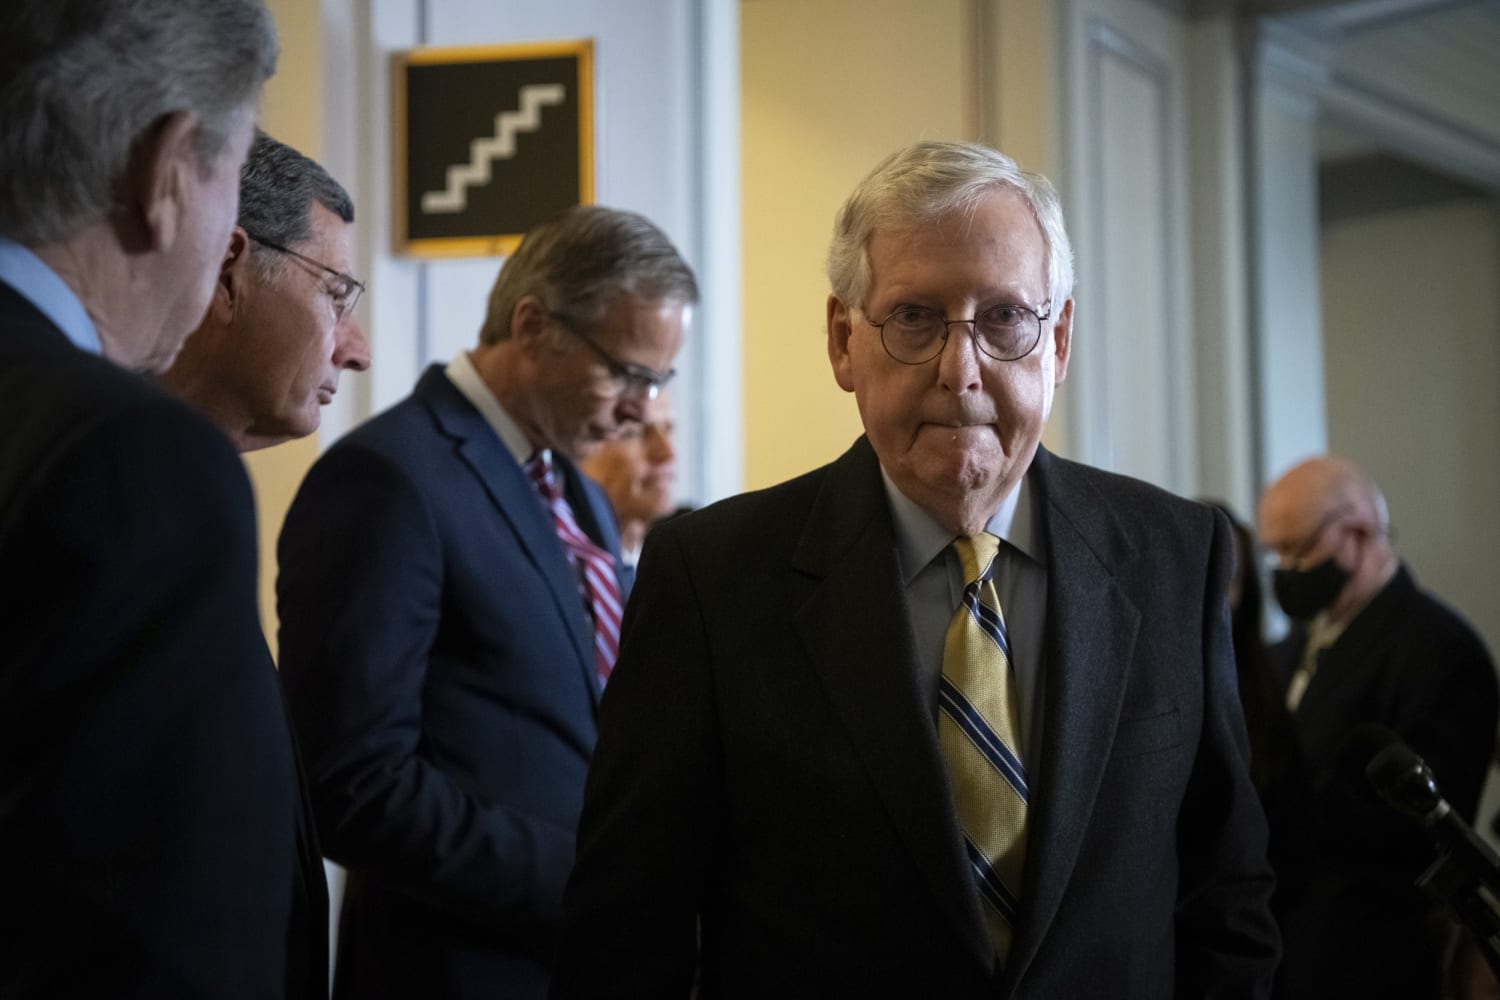 McConnell calls Senate Democrats ‘distasteful’ for tying Jan. 6 to voting rights push